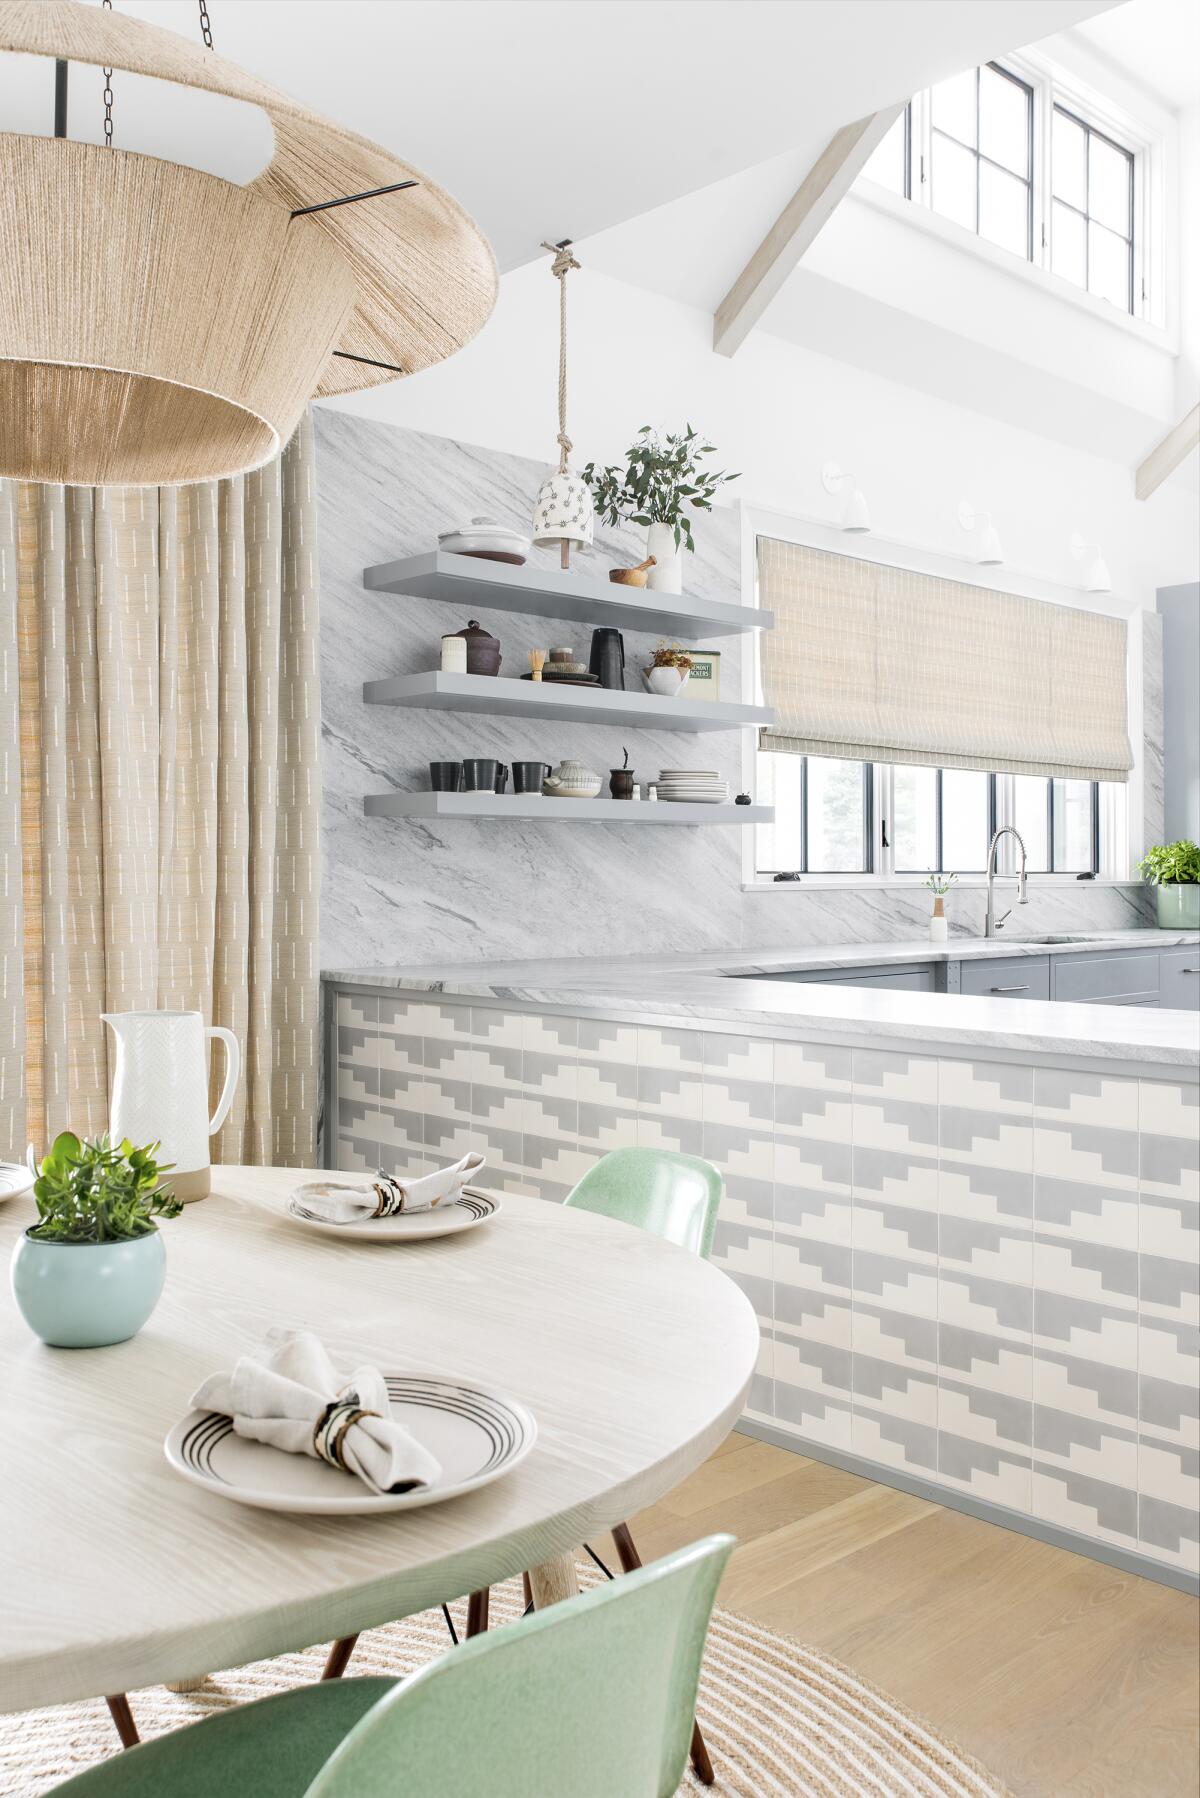 A brightly colored kitchen with distinctive patterned tiles on the island.